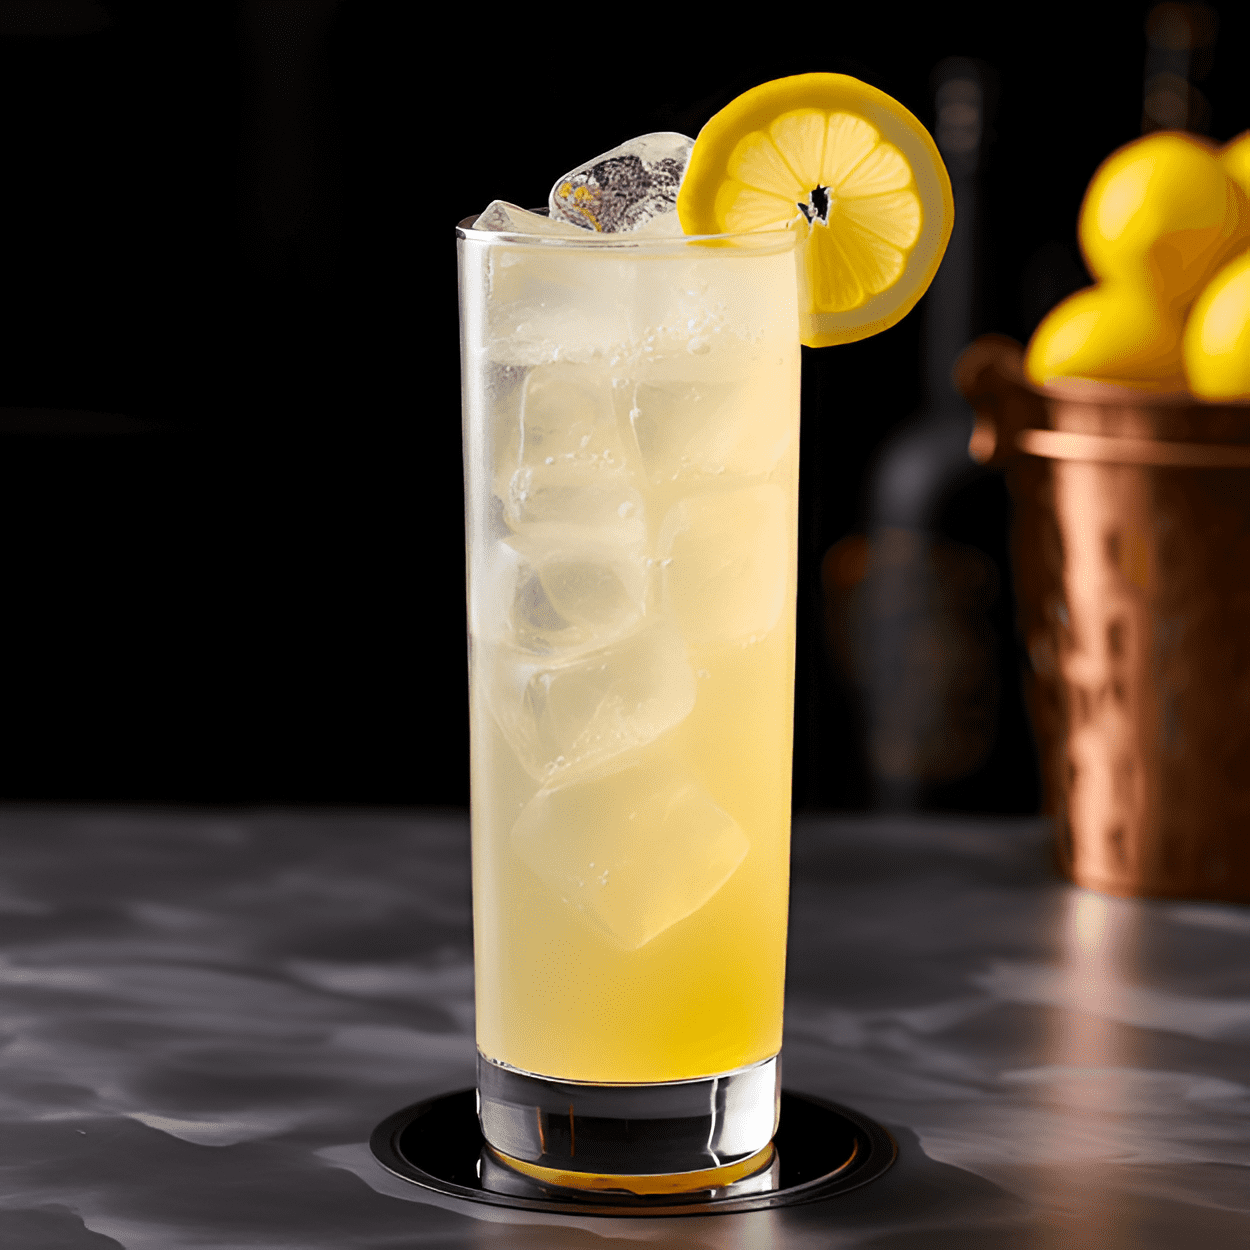 Thunder Bird Cocktail Recipe - The Thunder Bird cocktail is strong, citrusy, and slightly sweet. It has a robust flavor profile with a hint of tartness from the lemon juice and a subtle sweetness from the sugar syrup.